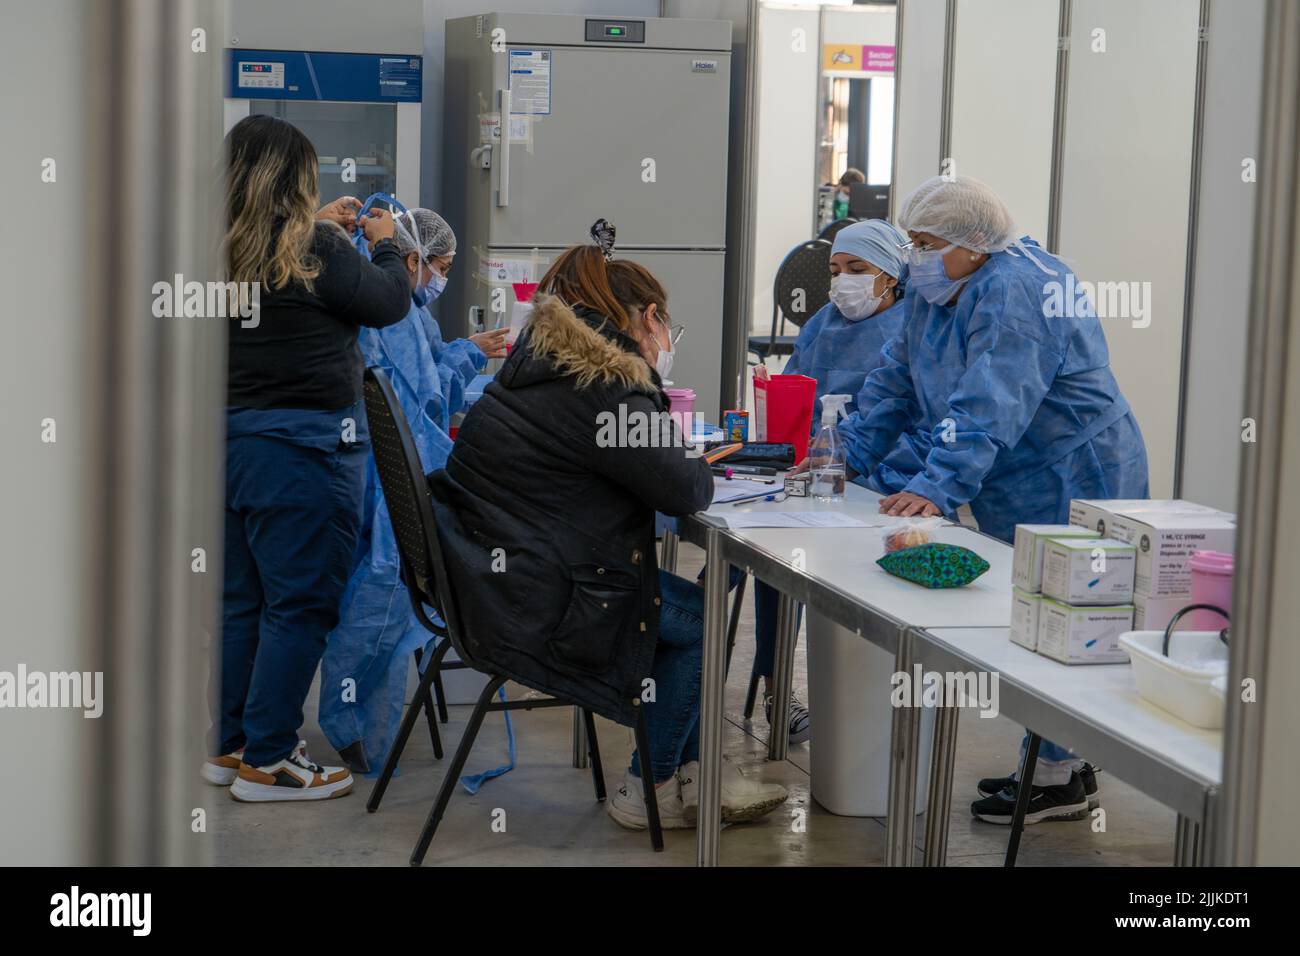 A closeup of people waiting in vaccination to be inoculated Stock Photo